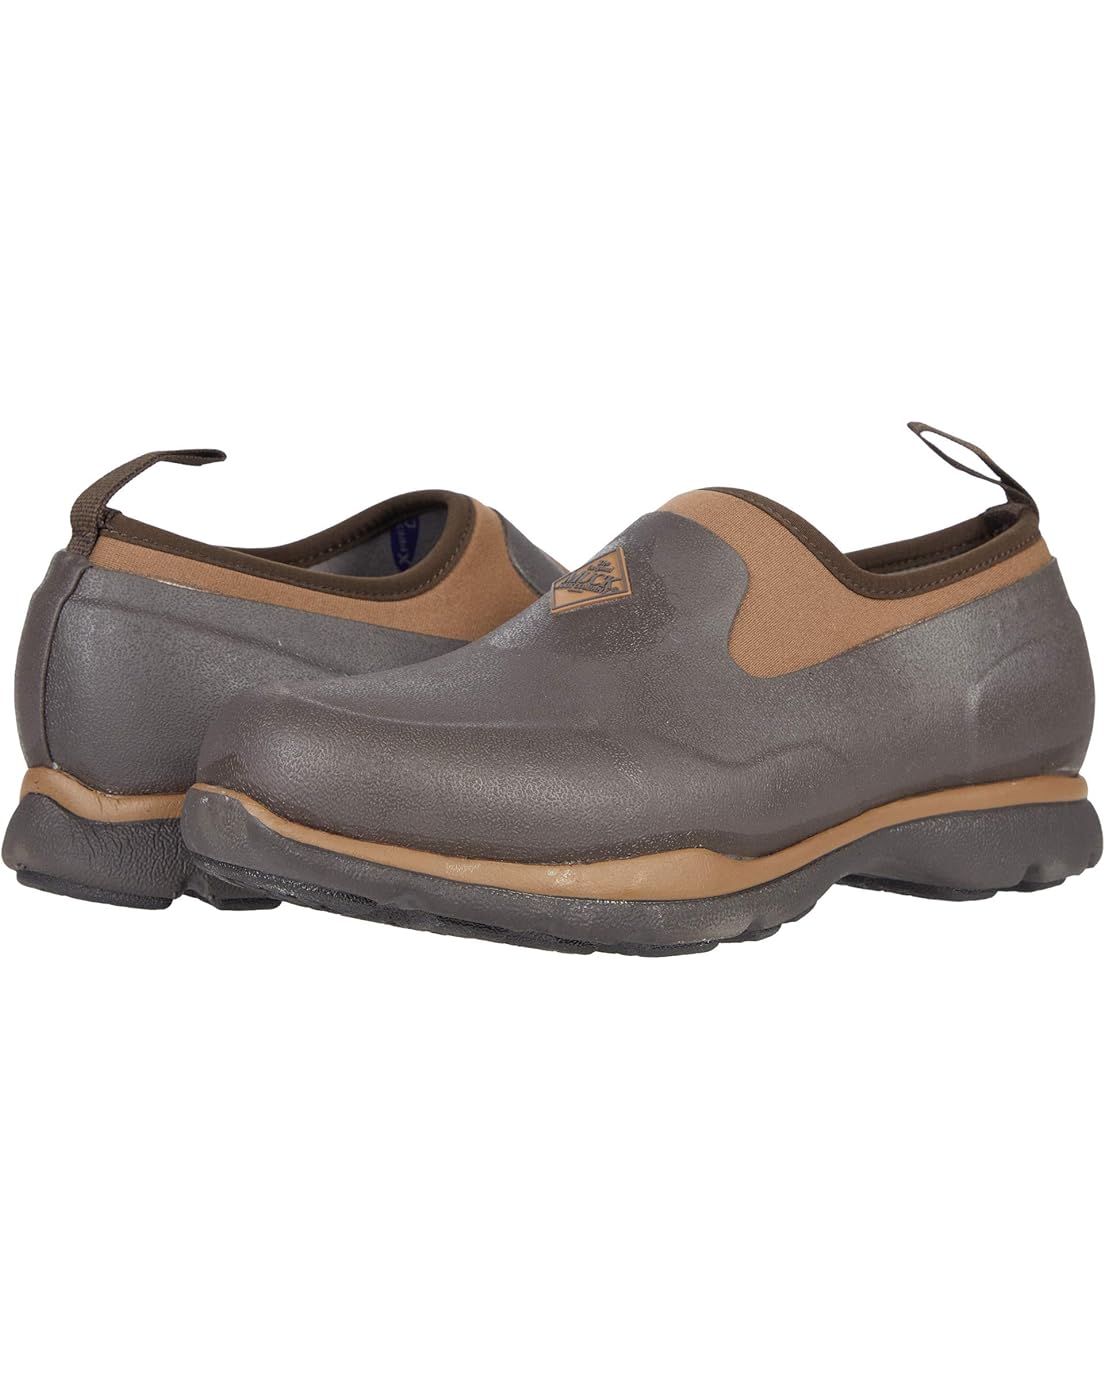 The Original Muck Boot Company Excursion Pro Low